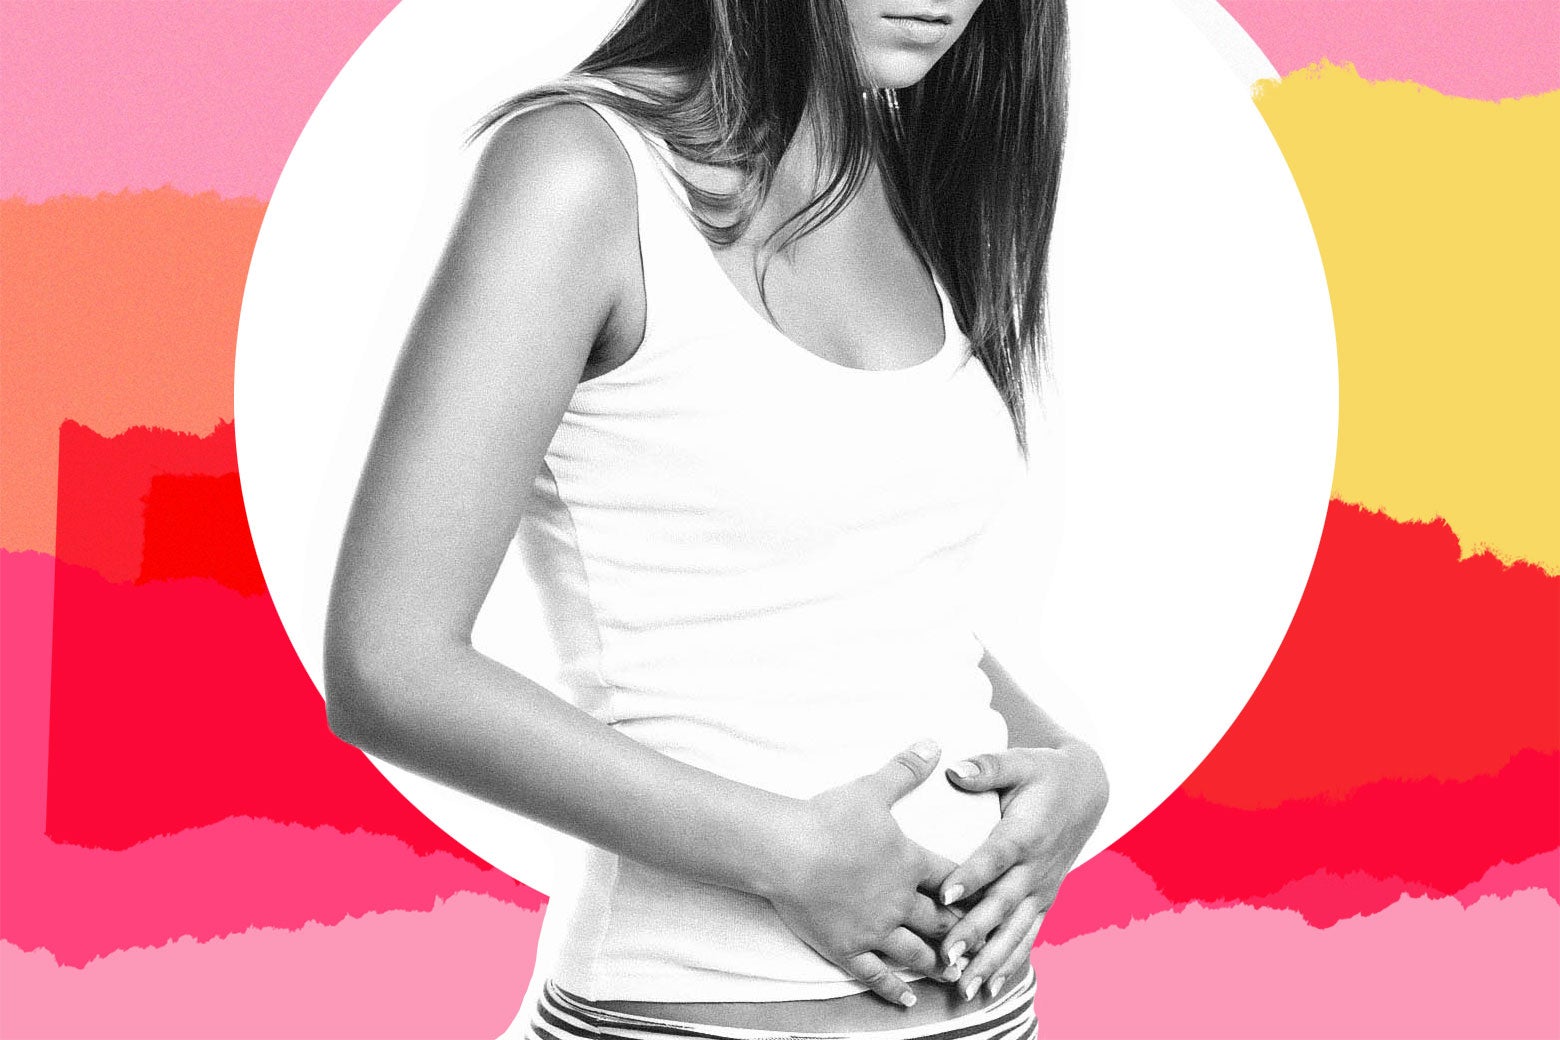 A woman places her hands on her stomach like she could have indigestion—or be pregnant.